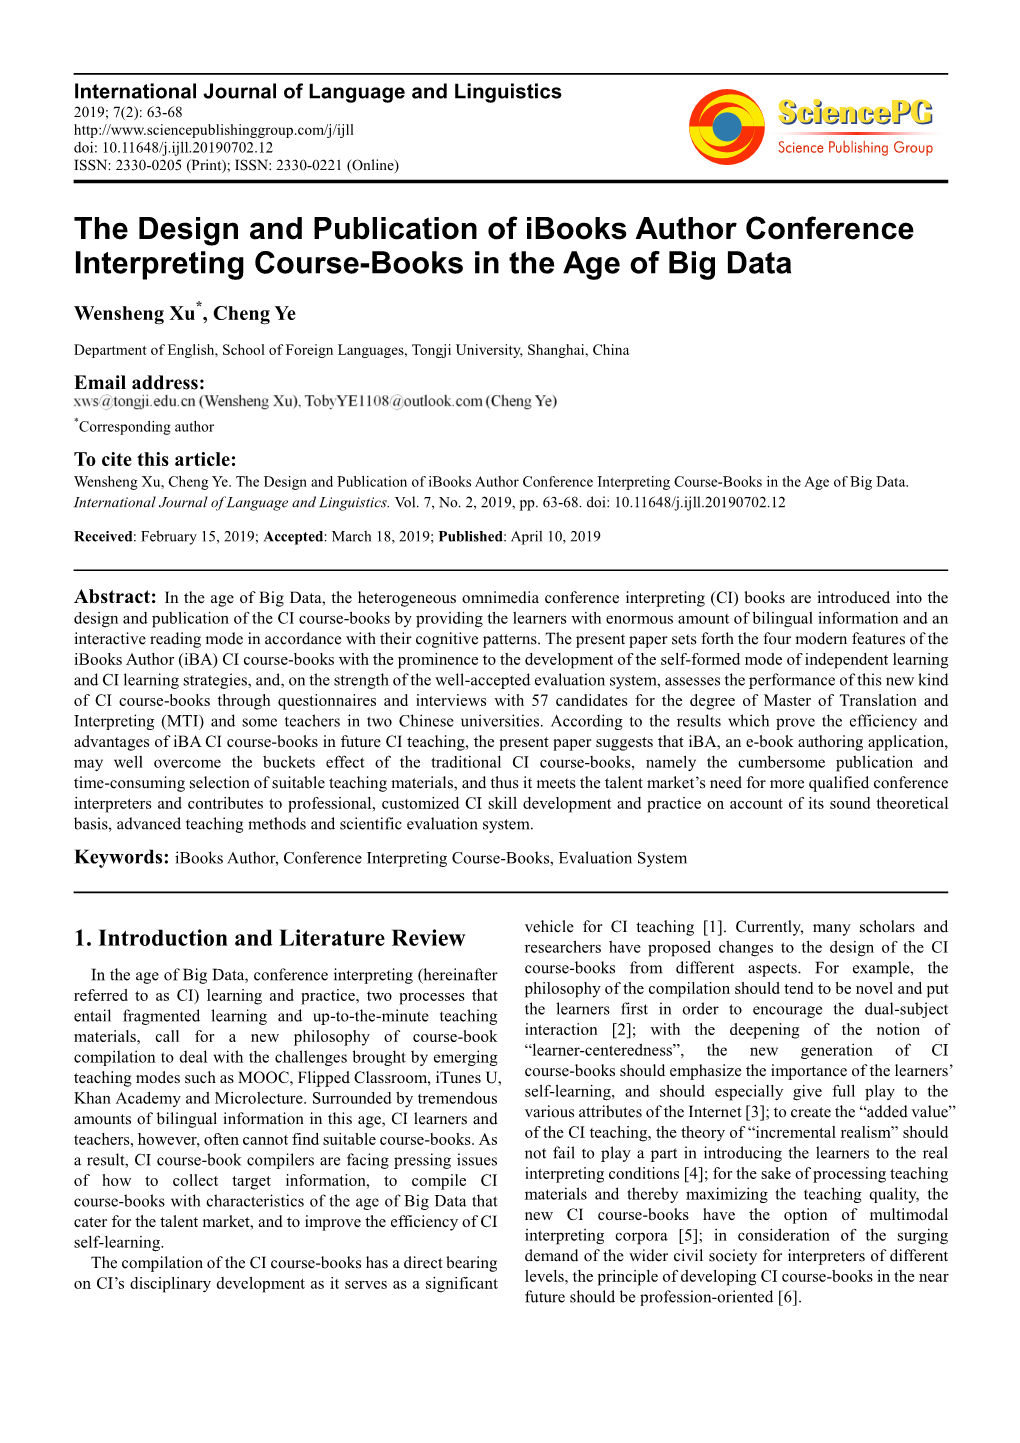 The Design and Publication of Ibooks Author Conference Interpreting Course-Books in the Age of Big Data